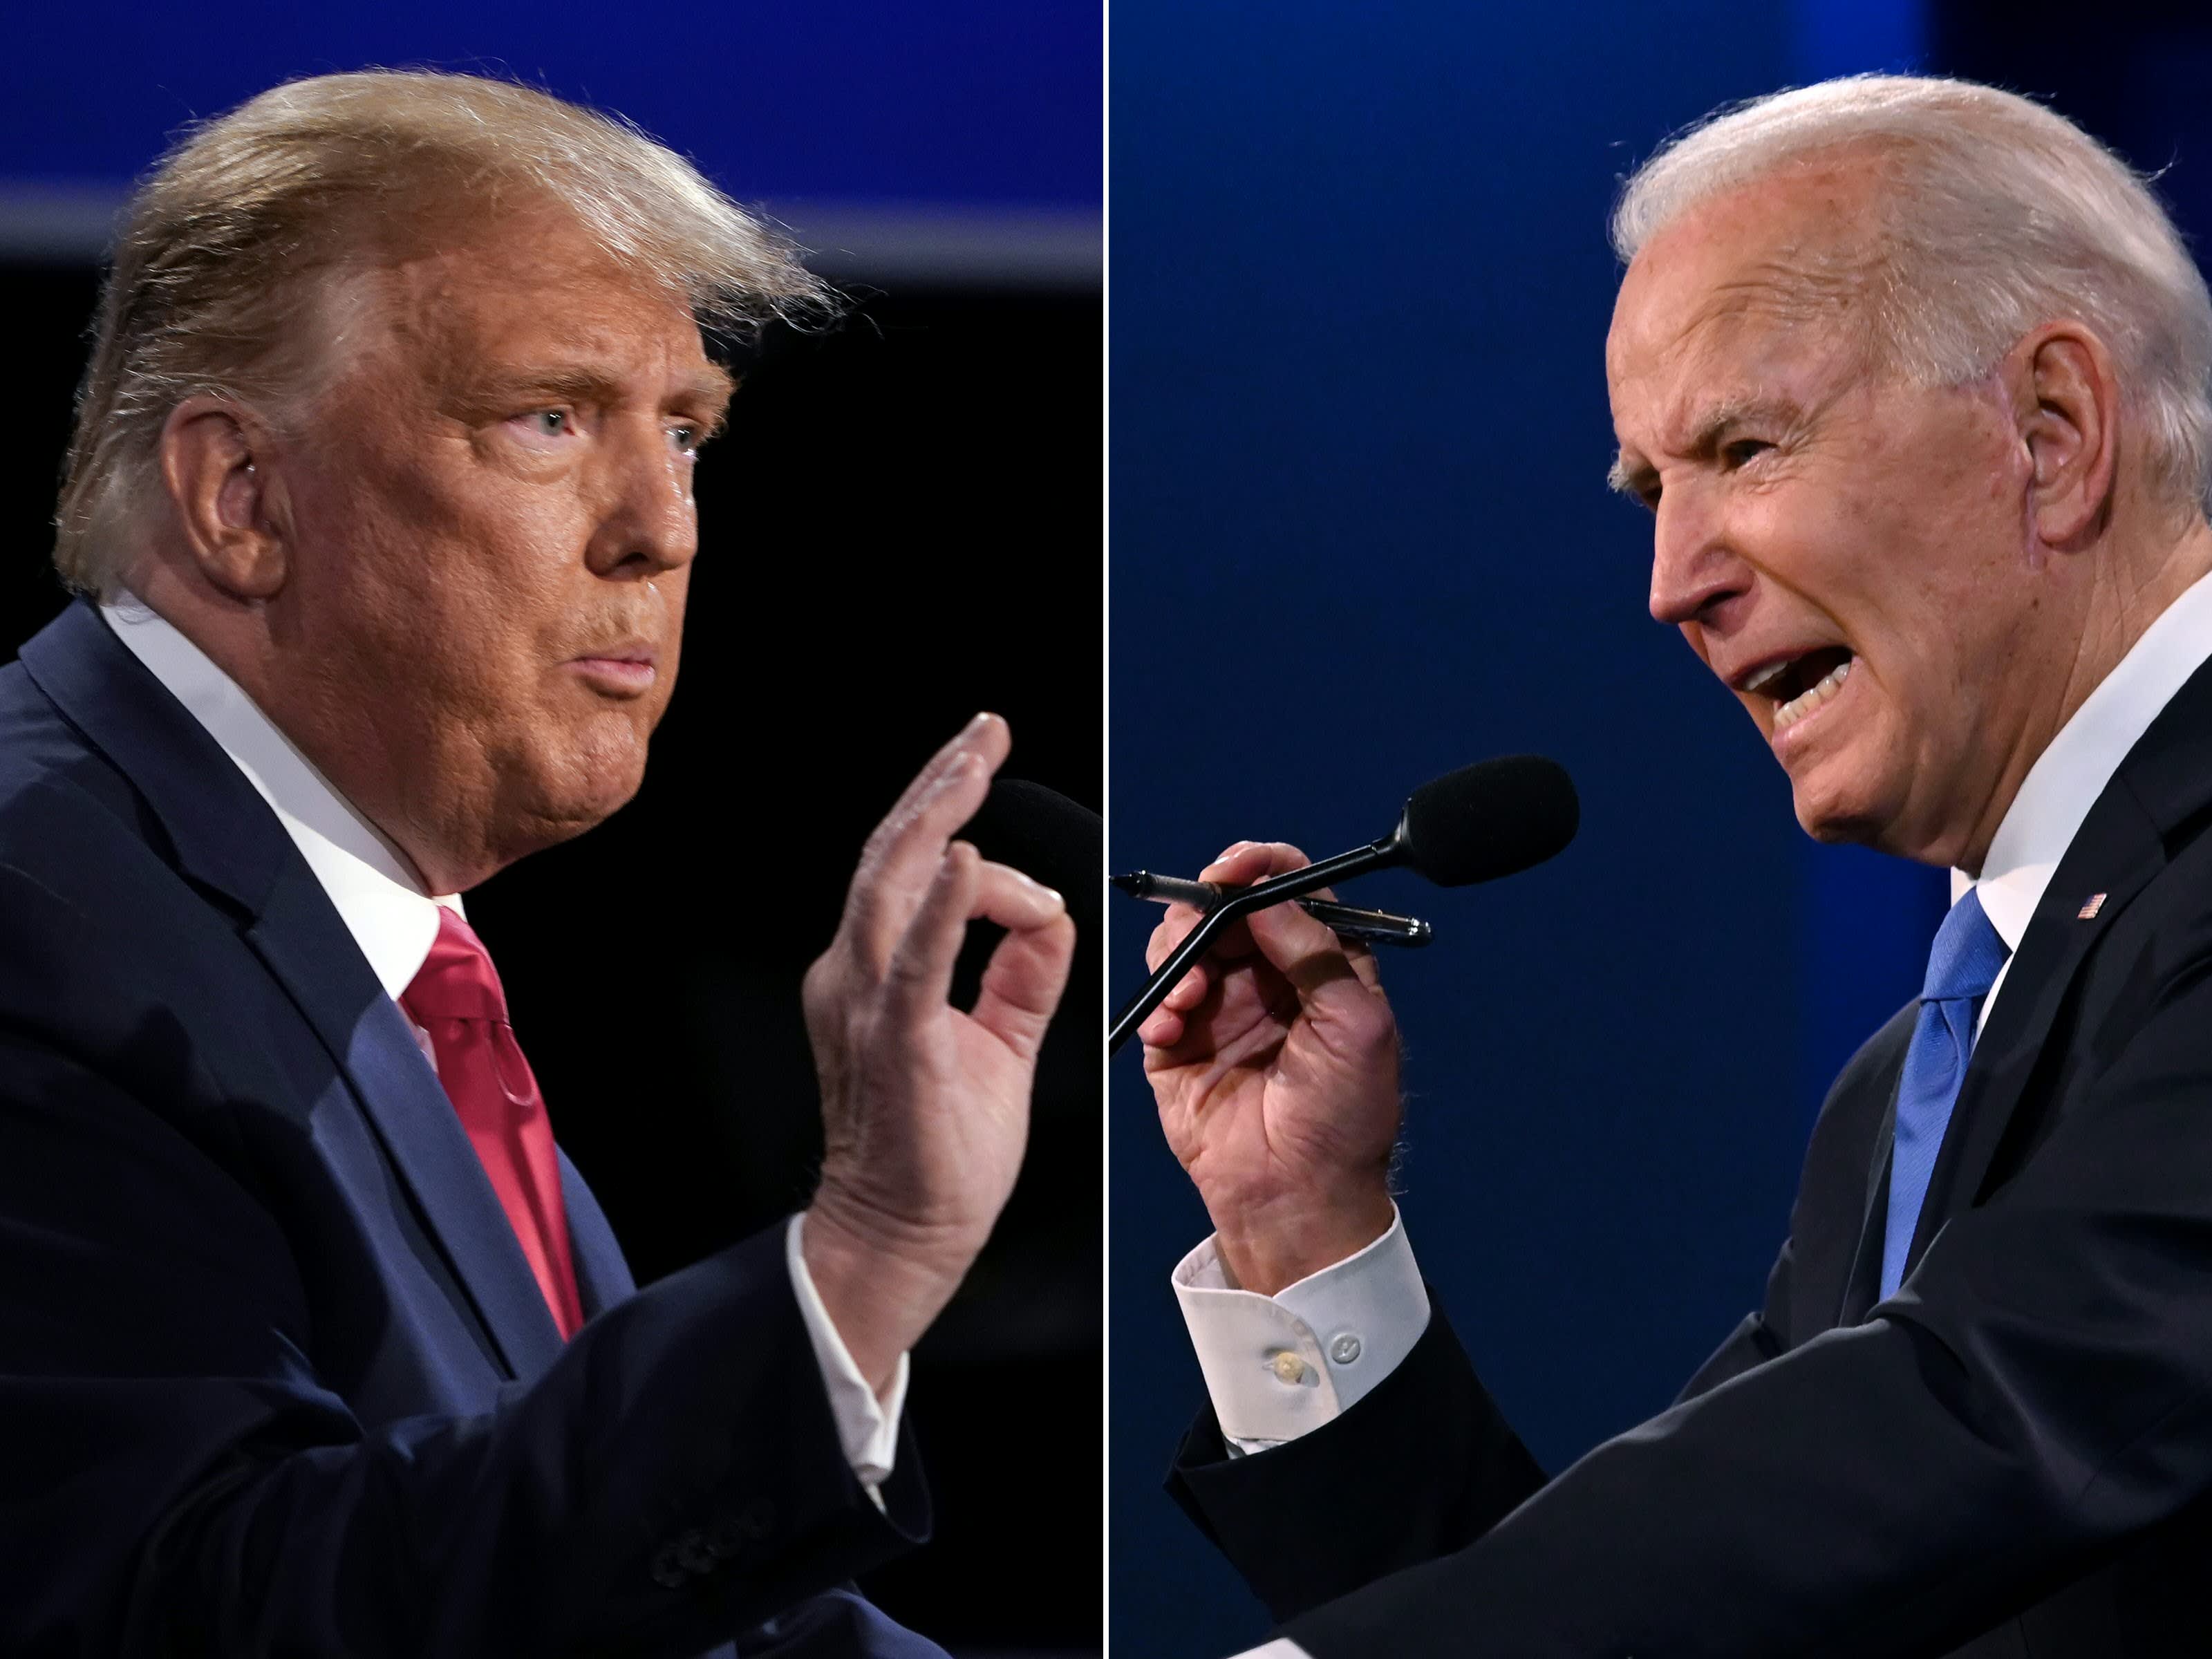 Donald Trump, left, and President Joe Biden during the final presidential debate at Belmont University in Nashville, Tennessee, on Oct. 22, 2020.  BRENDAN SMIALOWSKI | AFP | Getty Images  